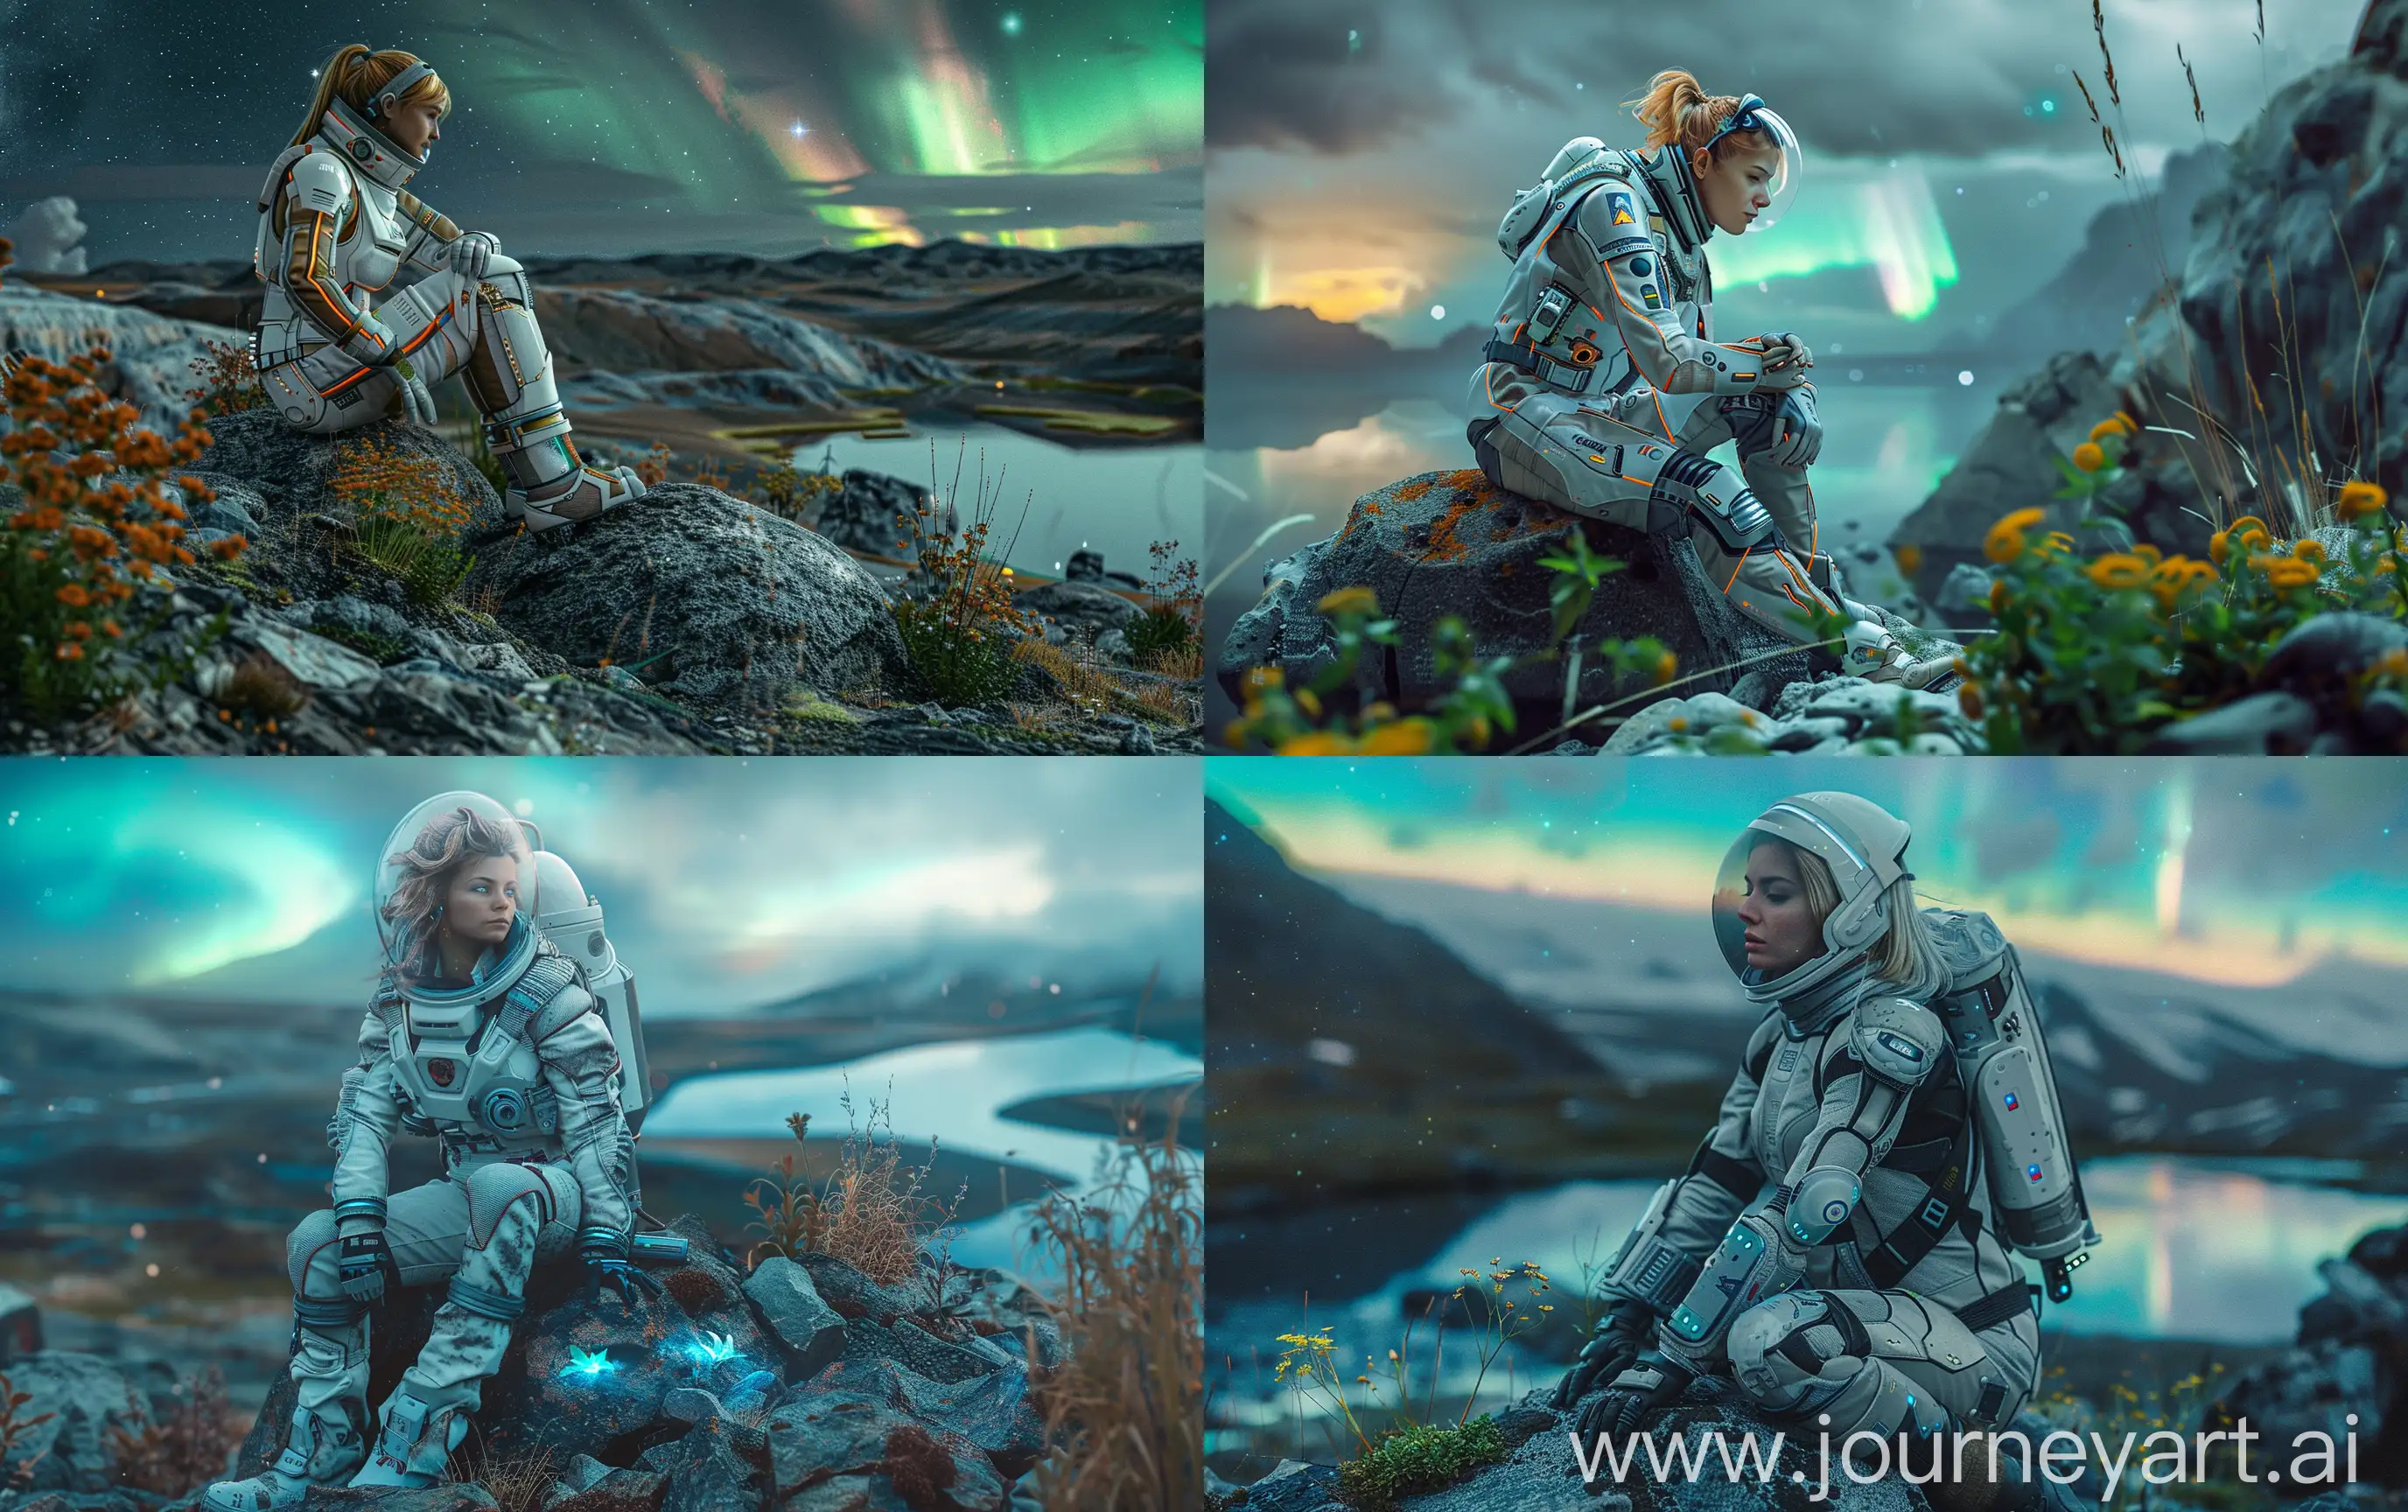 Exploring-a-Fictional-Planet-FairHaired-Astronaut-Amidst-SciFi-Nature-and-Northern-Lights